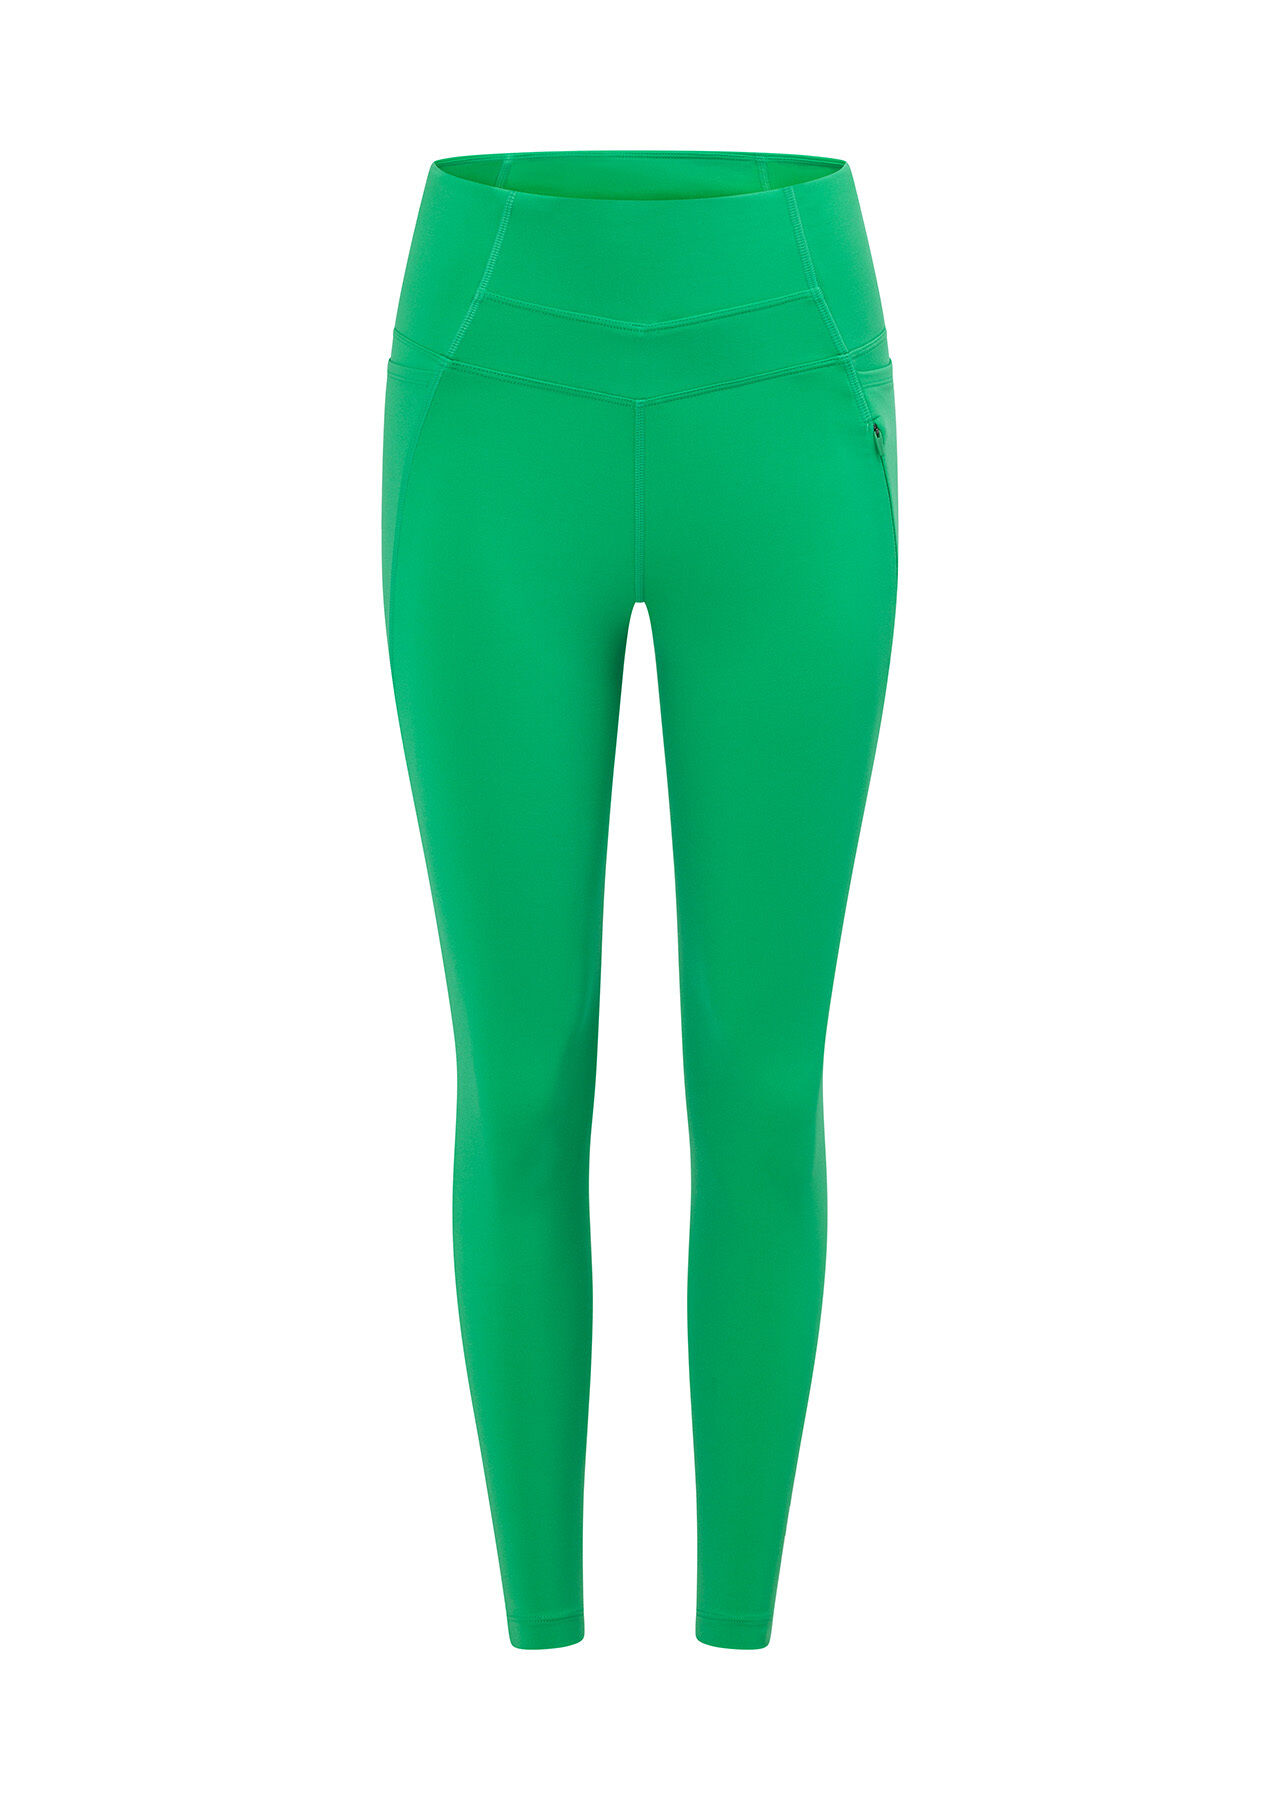 Bright green lime neon color Leggings by PalitraArt | Society6